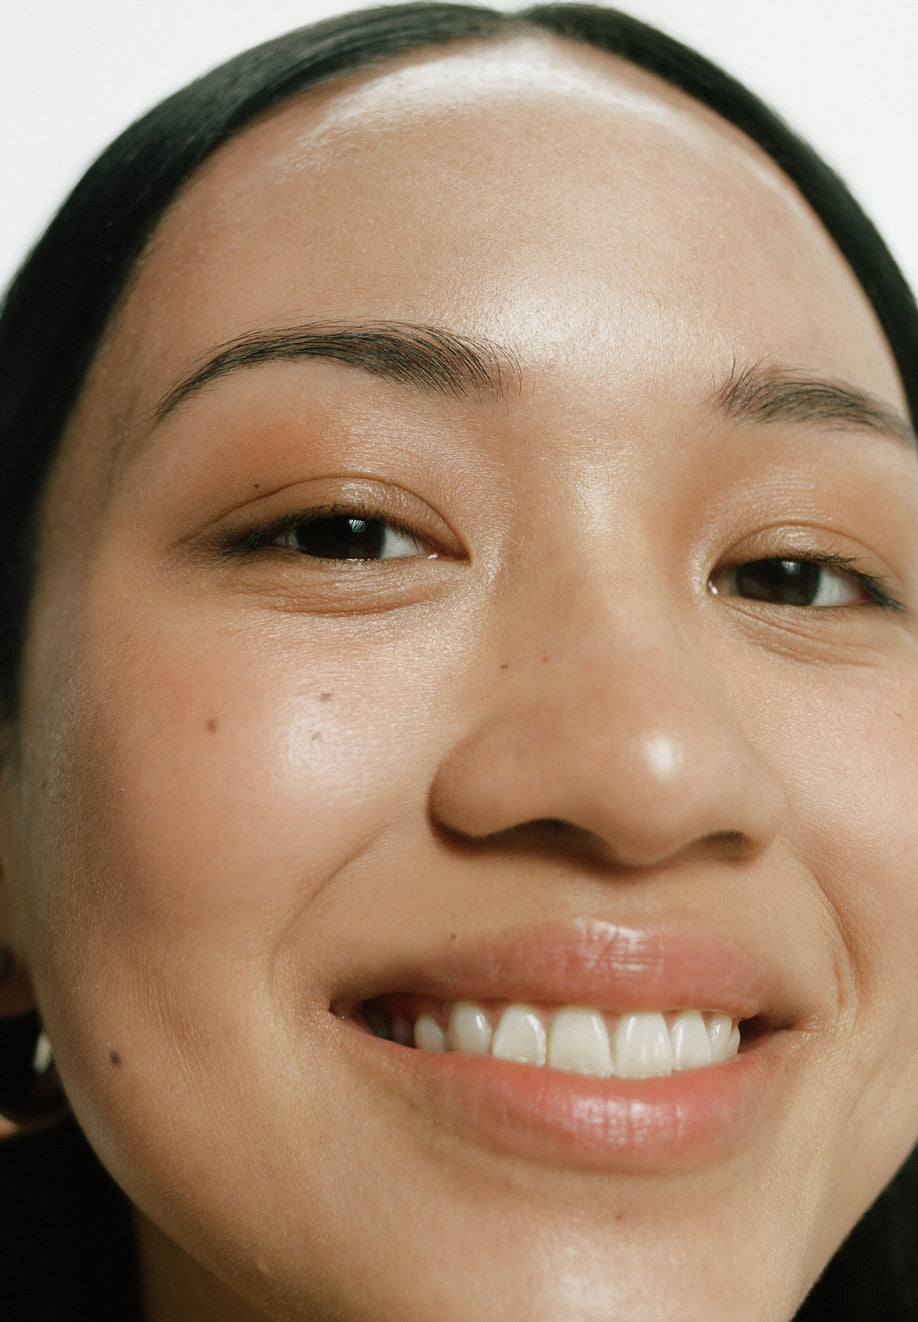 Close Up Shot of Woman Smiling Into Camera Lense. Her Skin is visibly is Soft, Smooth and Shiny